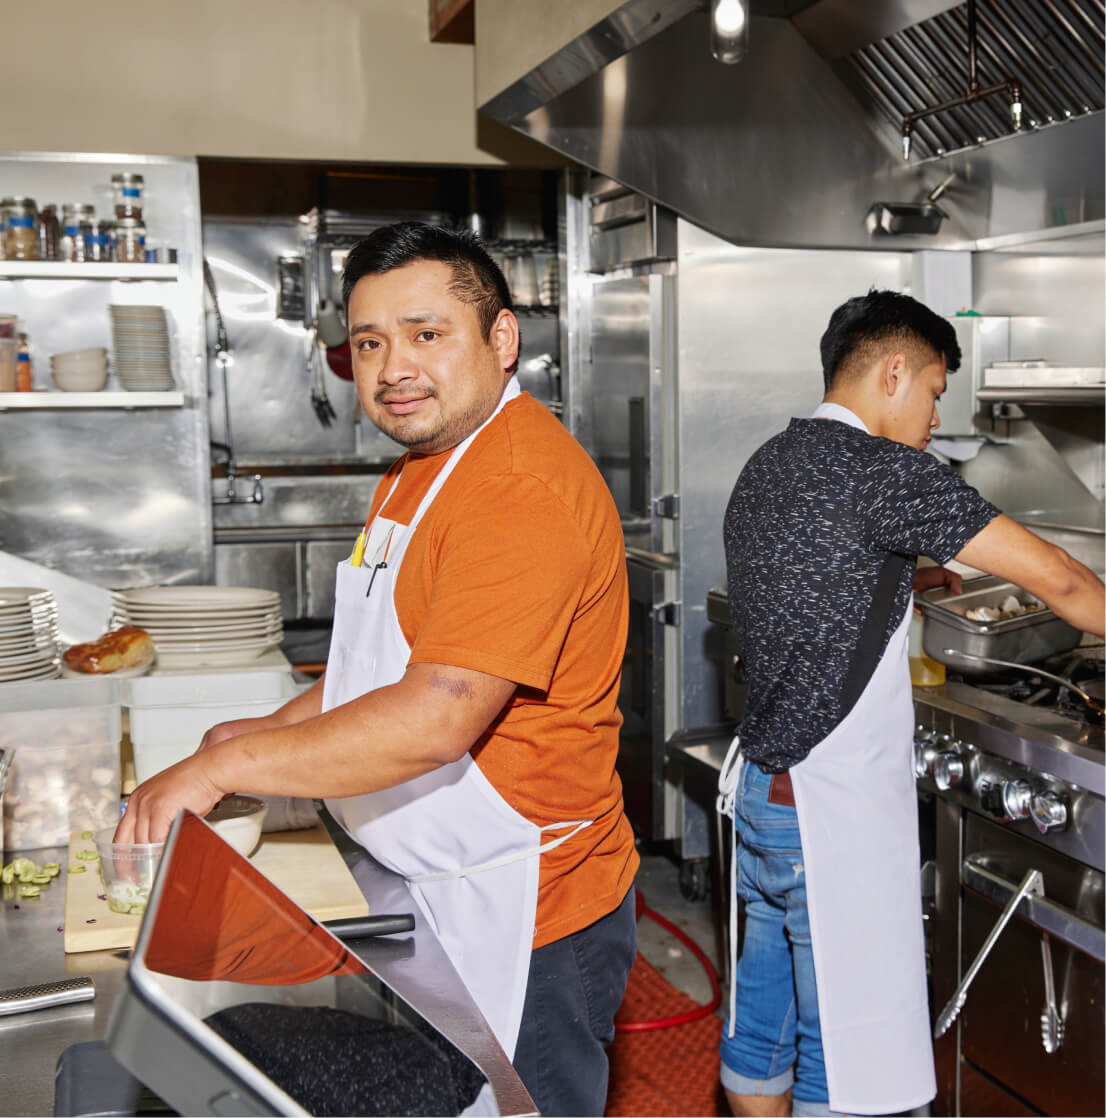 Restaurant insurance in Montana tailored for your business